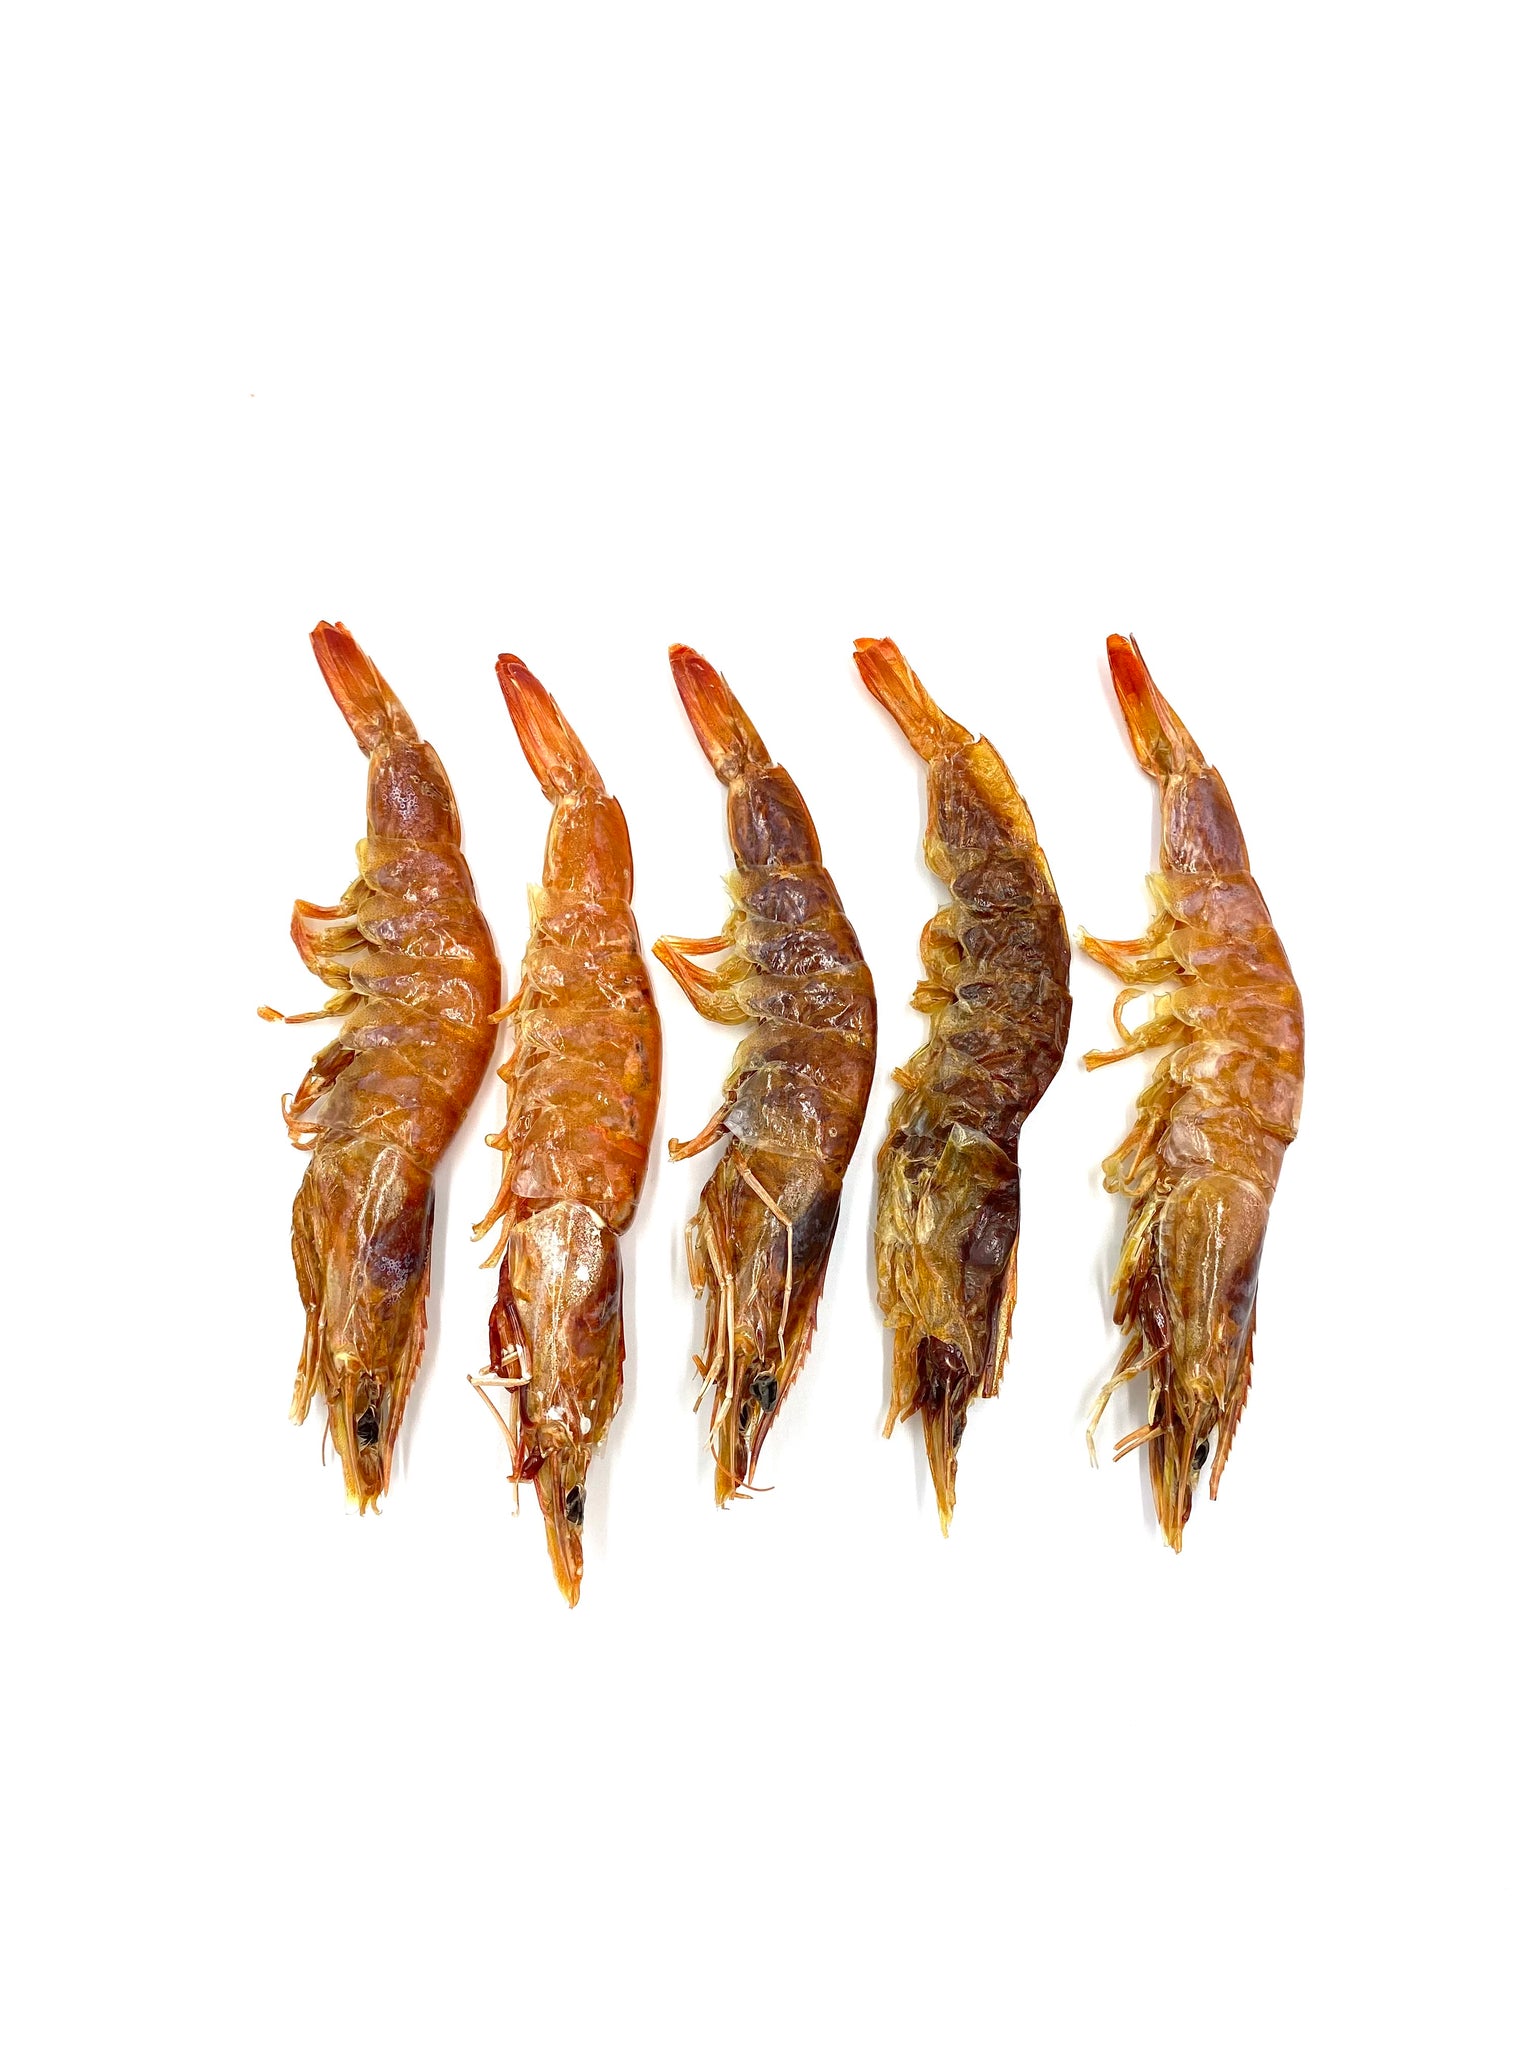 Dehydrated Whole Prawns: Seafood Treats for Dogs, Shrimp Treats for Dogs